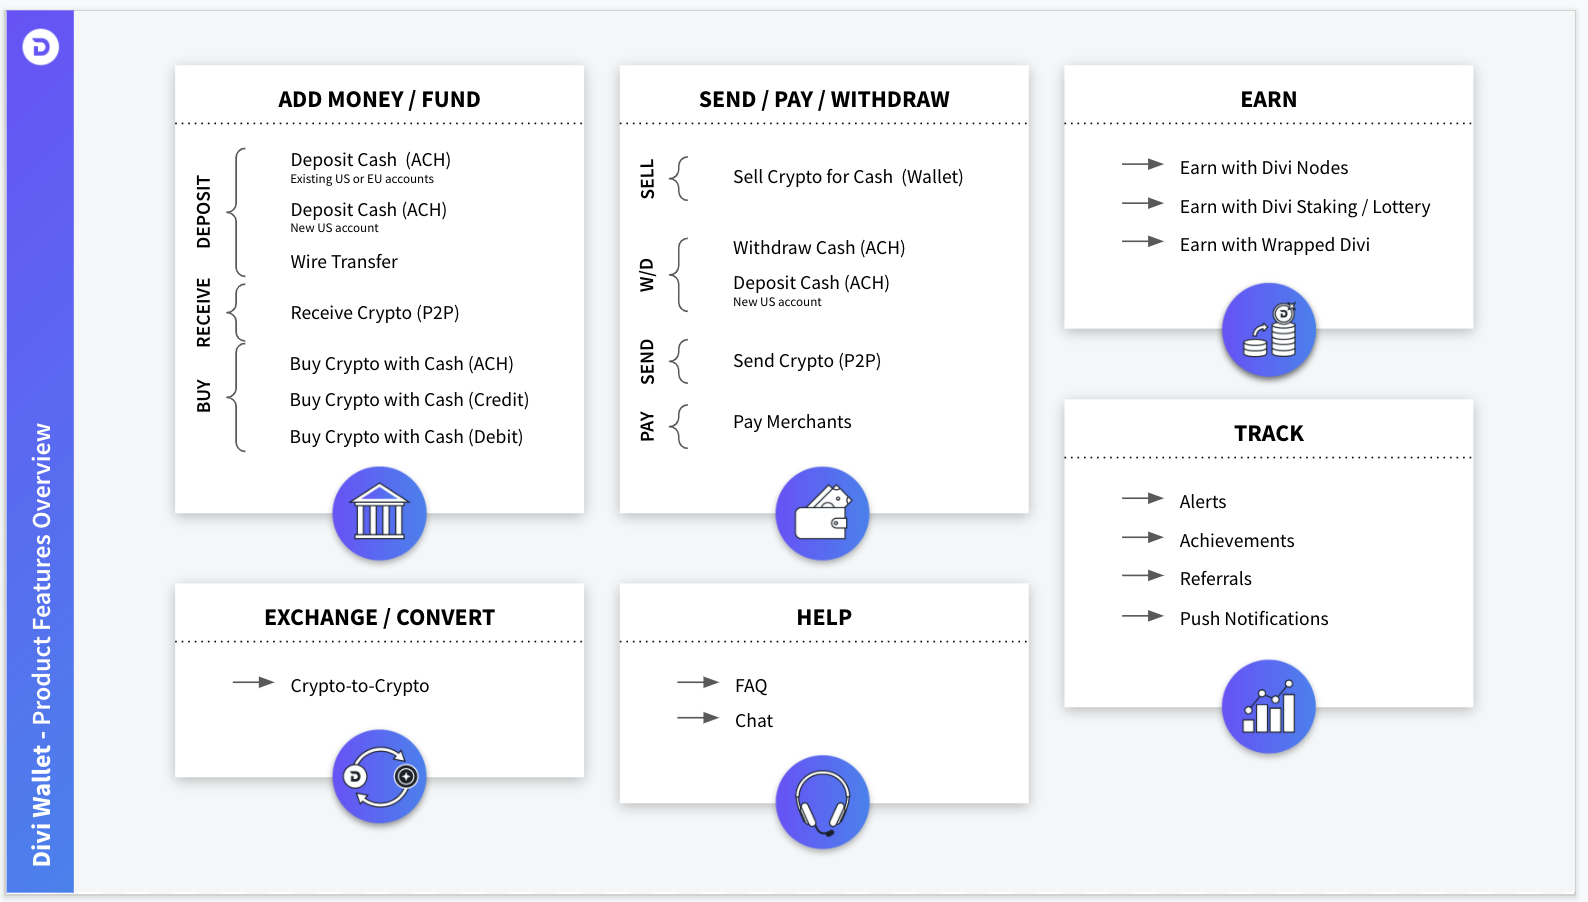 Divi Wallet product offerings